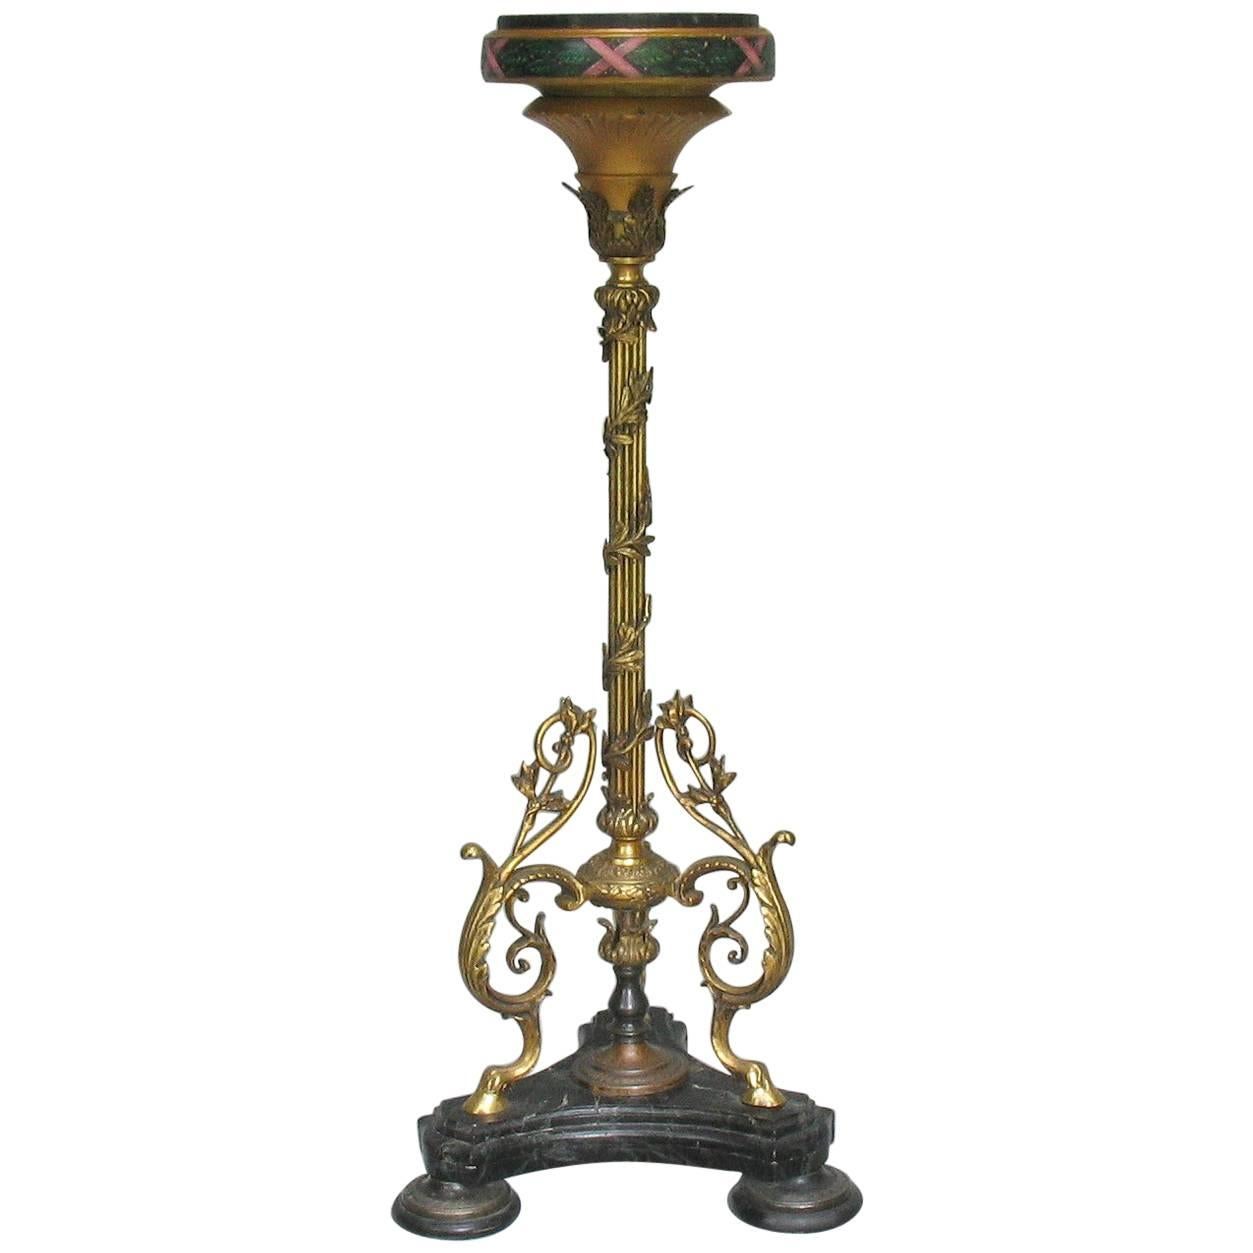 Incredible Russian Gilt Bronze Gueridon with a Granite Top, 19th Century